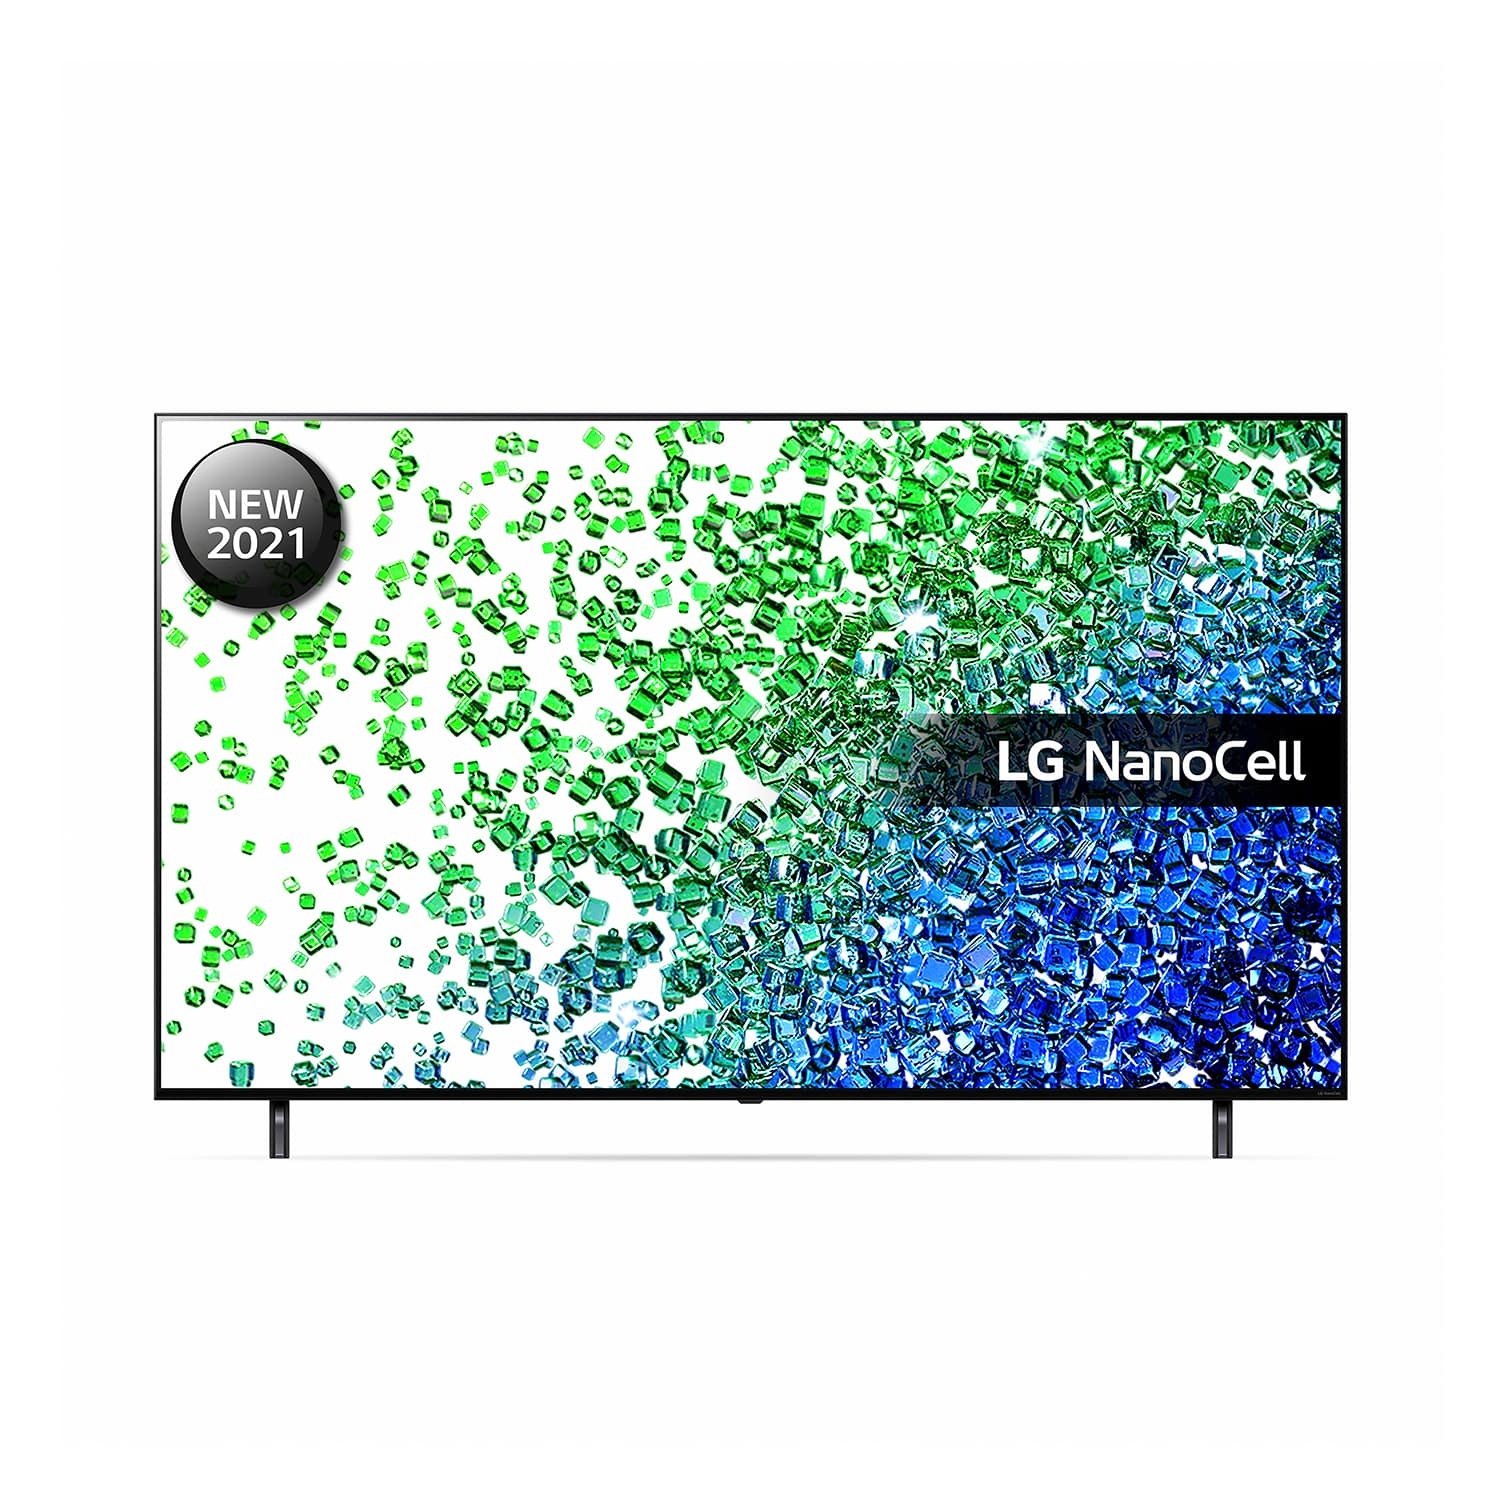 LG 50NANO806PA 50" 4K Ultra HD HDR NanoCell LED Smart TV with Freeview Play Freesat HD & Voice Assistants - 0